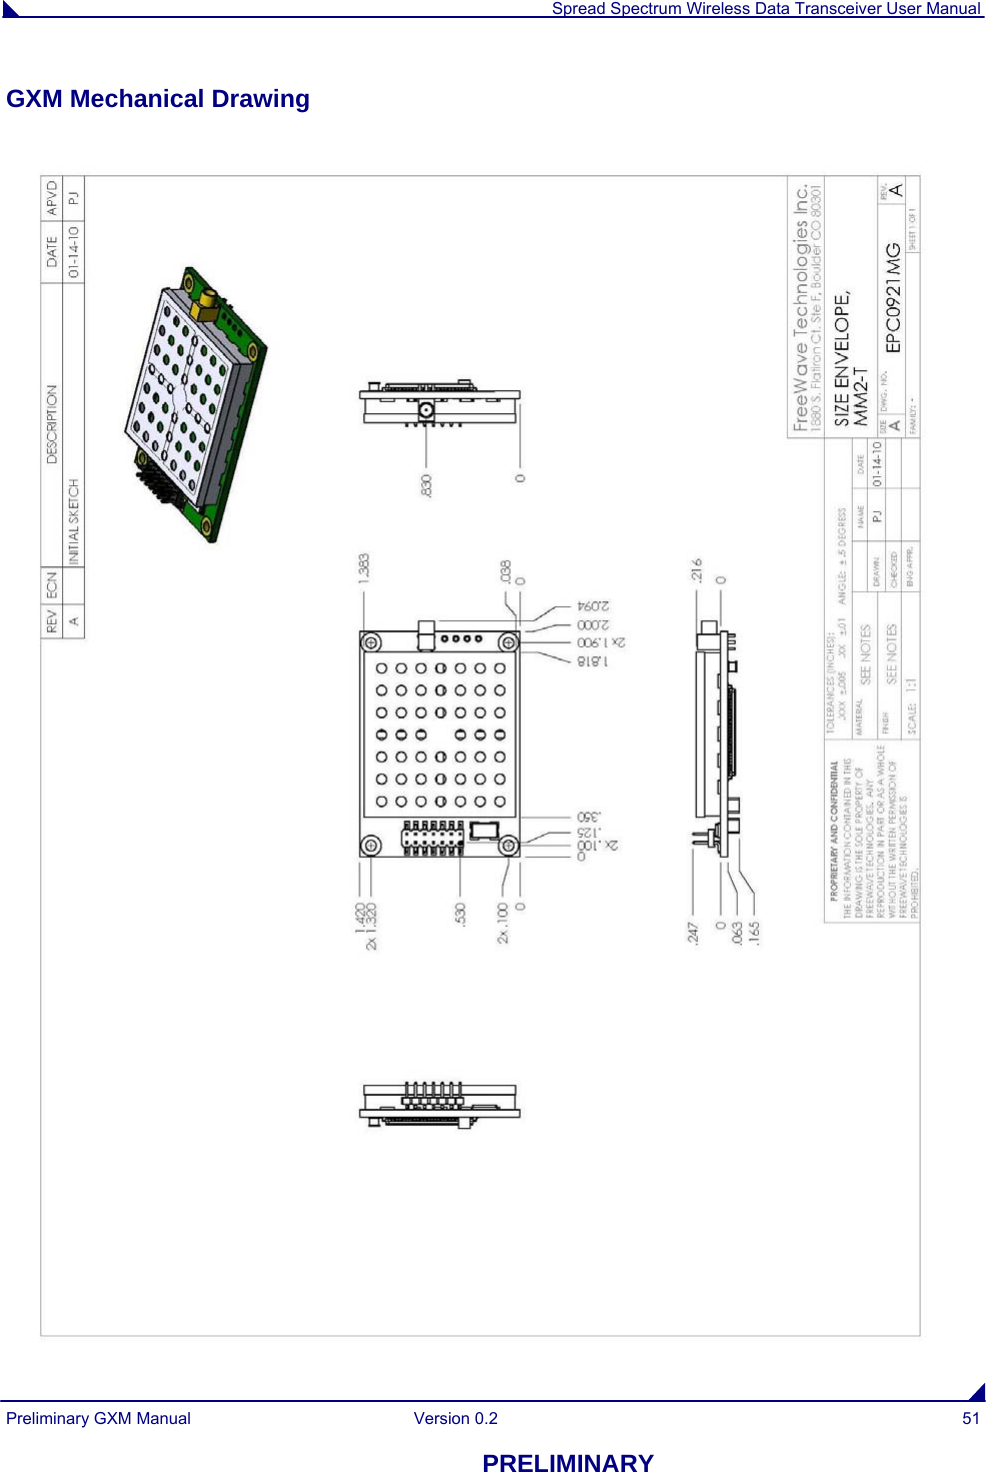  Spread Spectrum Wireless Data Transceiver User Manual Preliminary GXM Manual  Version 0.2  51 PRELIMINARY GXM Mechanical Drawing 